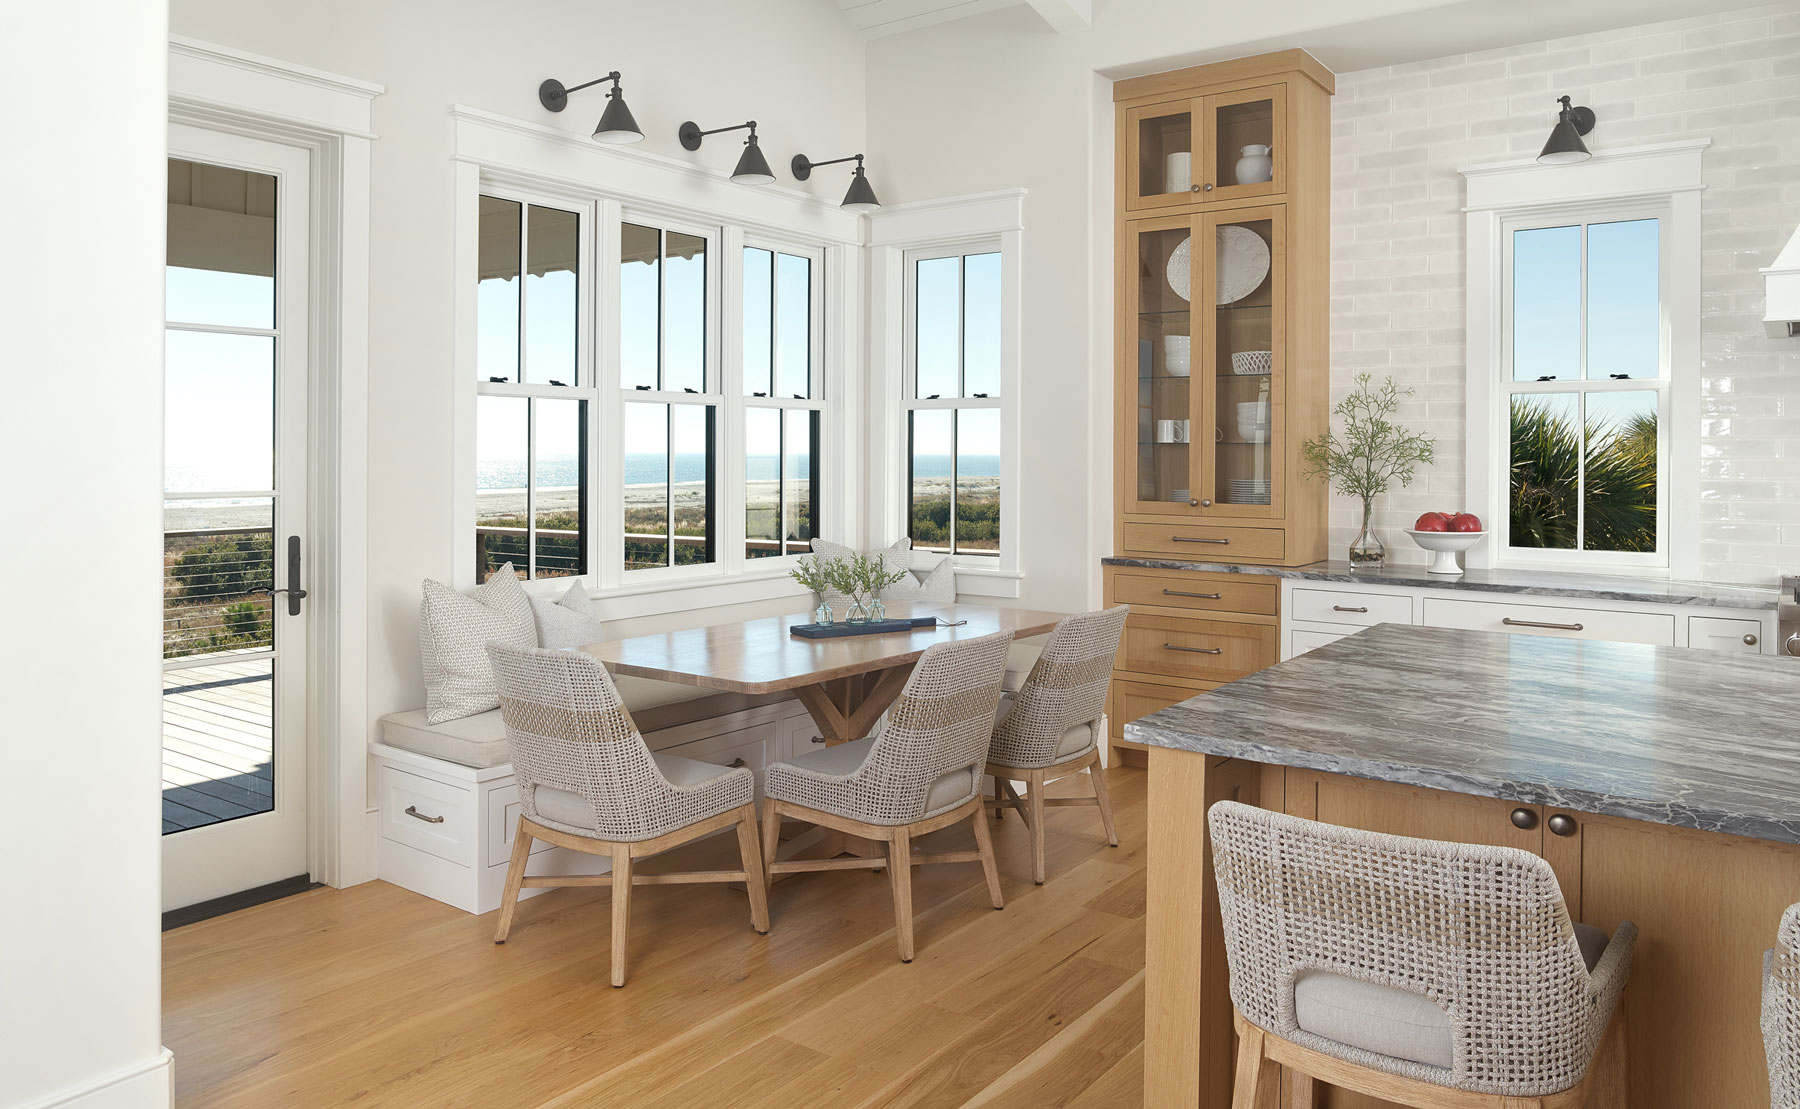 Dining nook, eat-in kitchen with ocean view